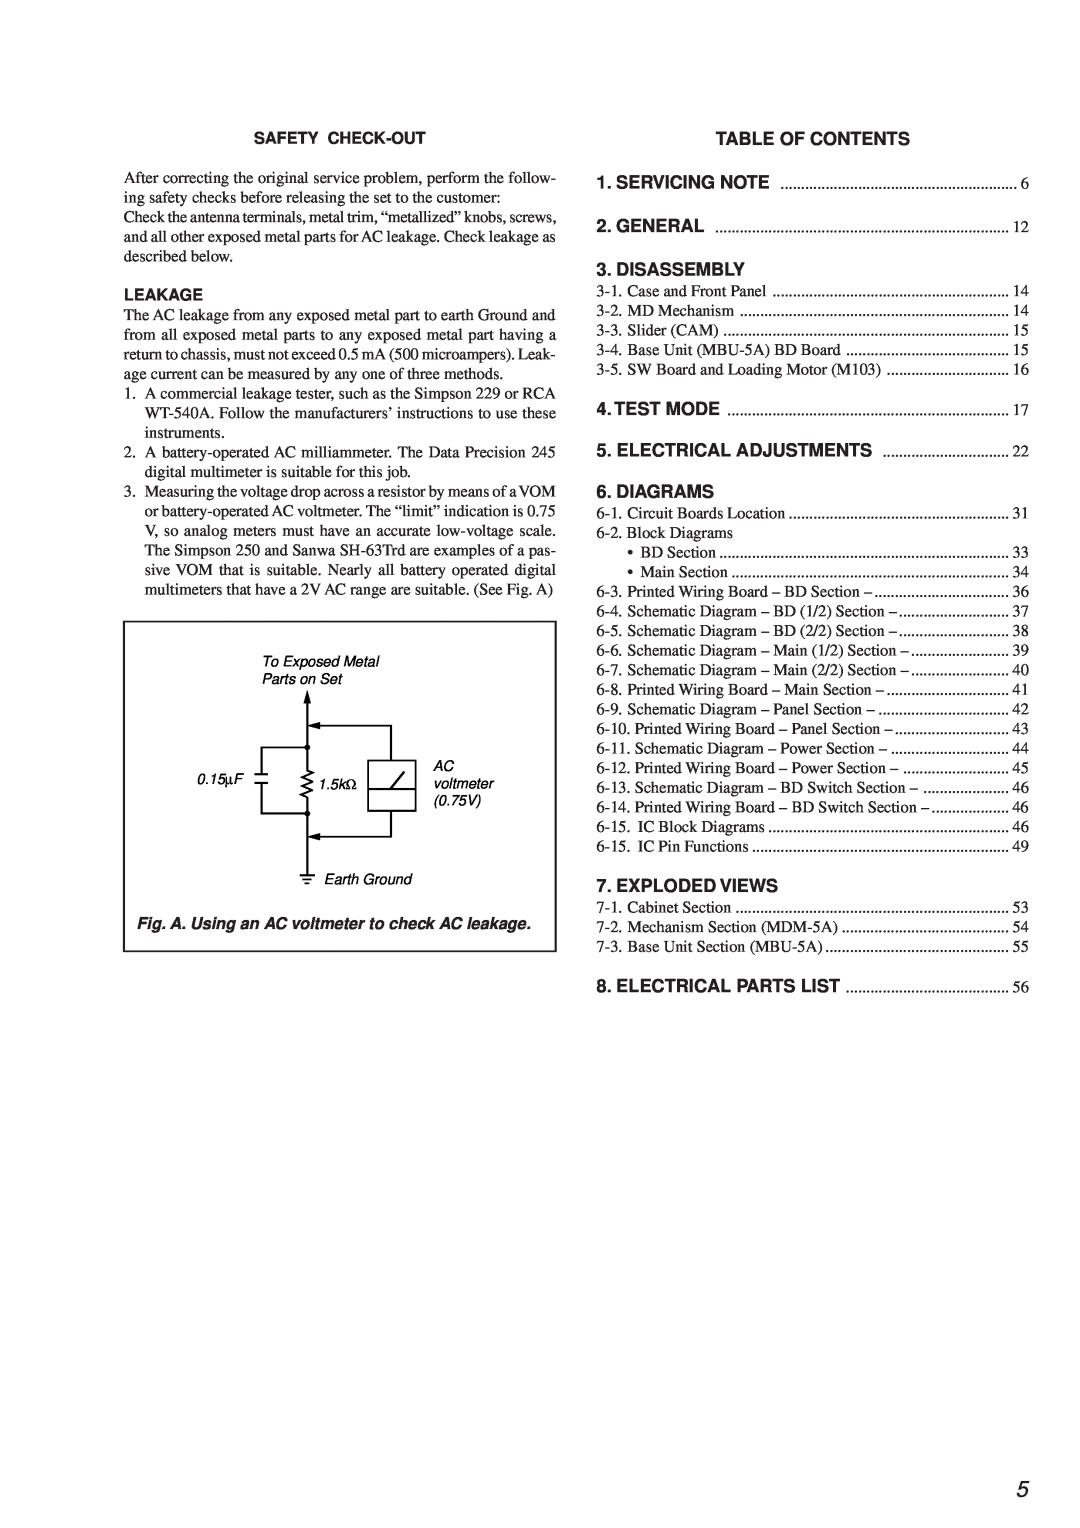 Sony MDS-PC2 service manual Table Of Contents, Disassembly, Diagrams, Exploded Views, Safety Check-Out, Leakage 